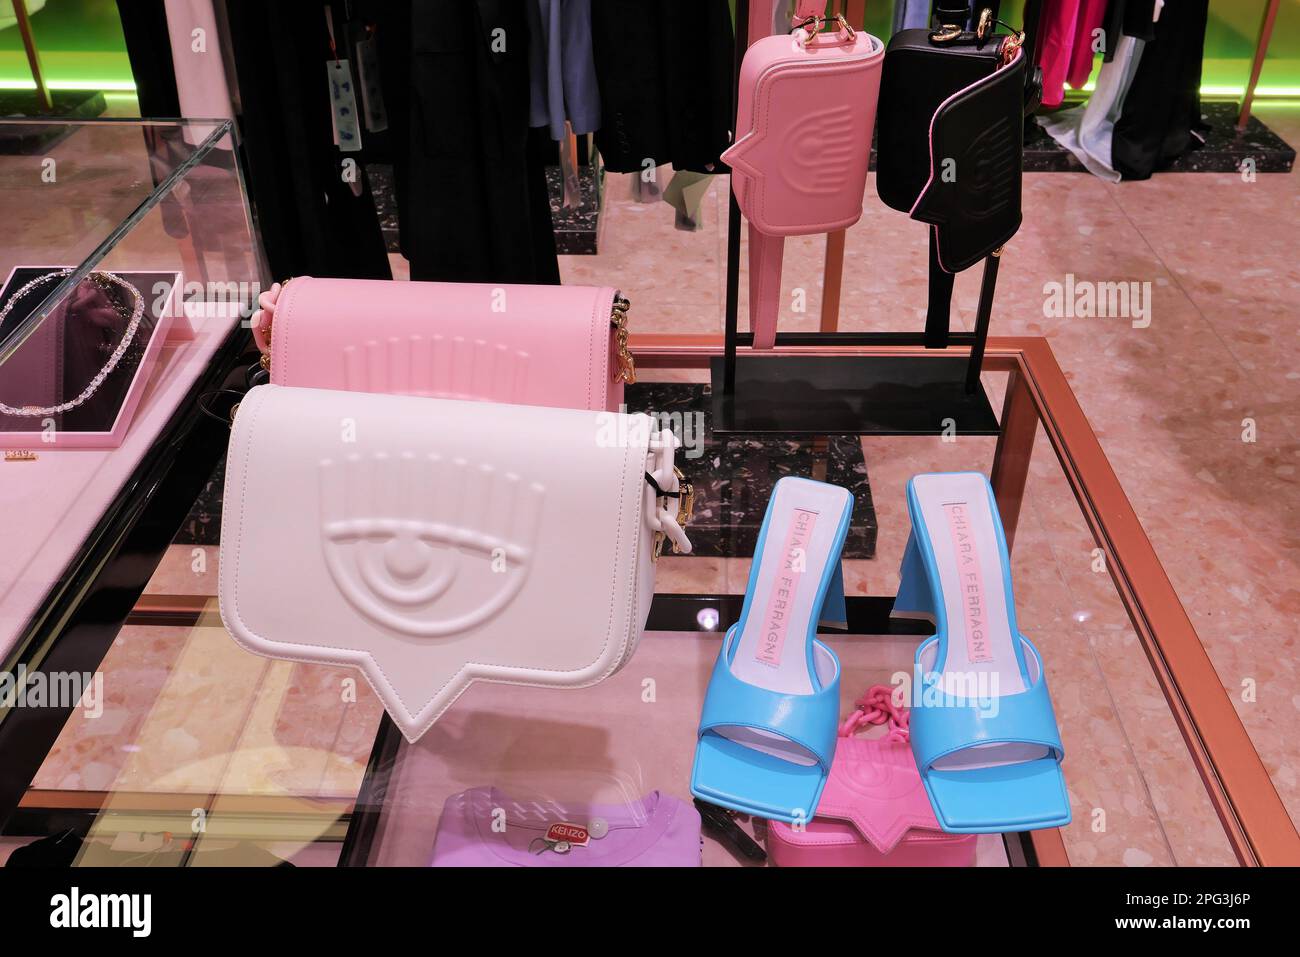 CHIARA FERRAGNI BAG AND SHOES FOR WOMEN INSIDE THE FASHION STORE